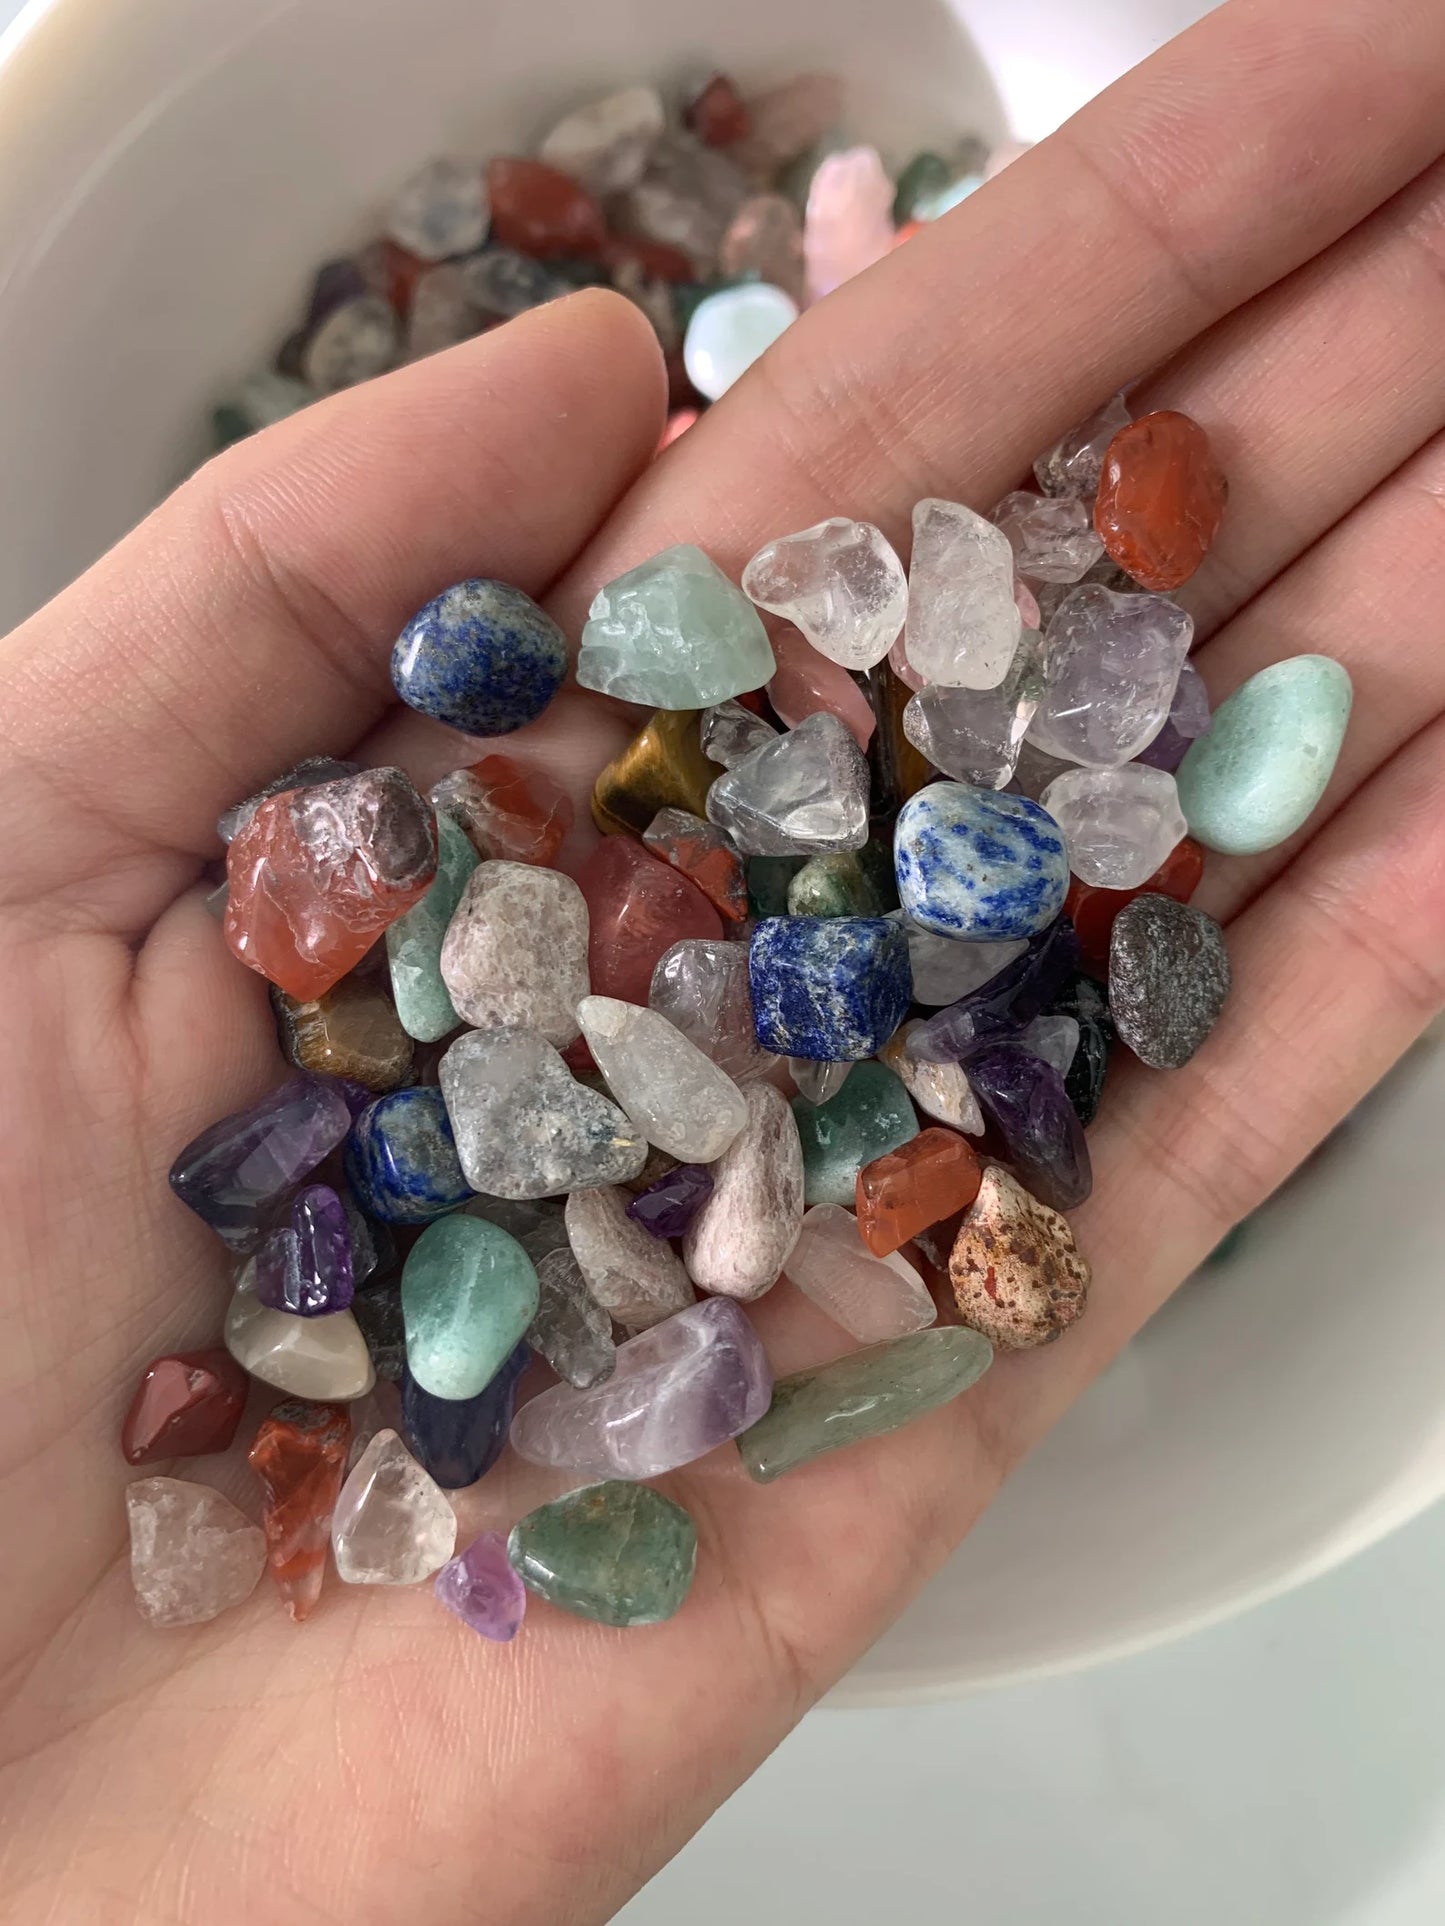 Assorted Mix Polished Stones -Small Crystals for Crafting, Jewelry Making - Mixed Lot Collection